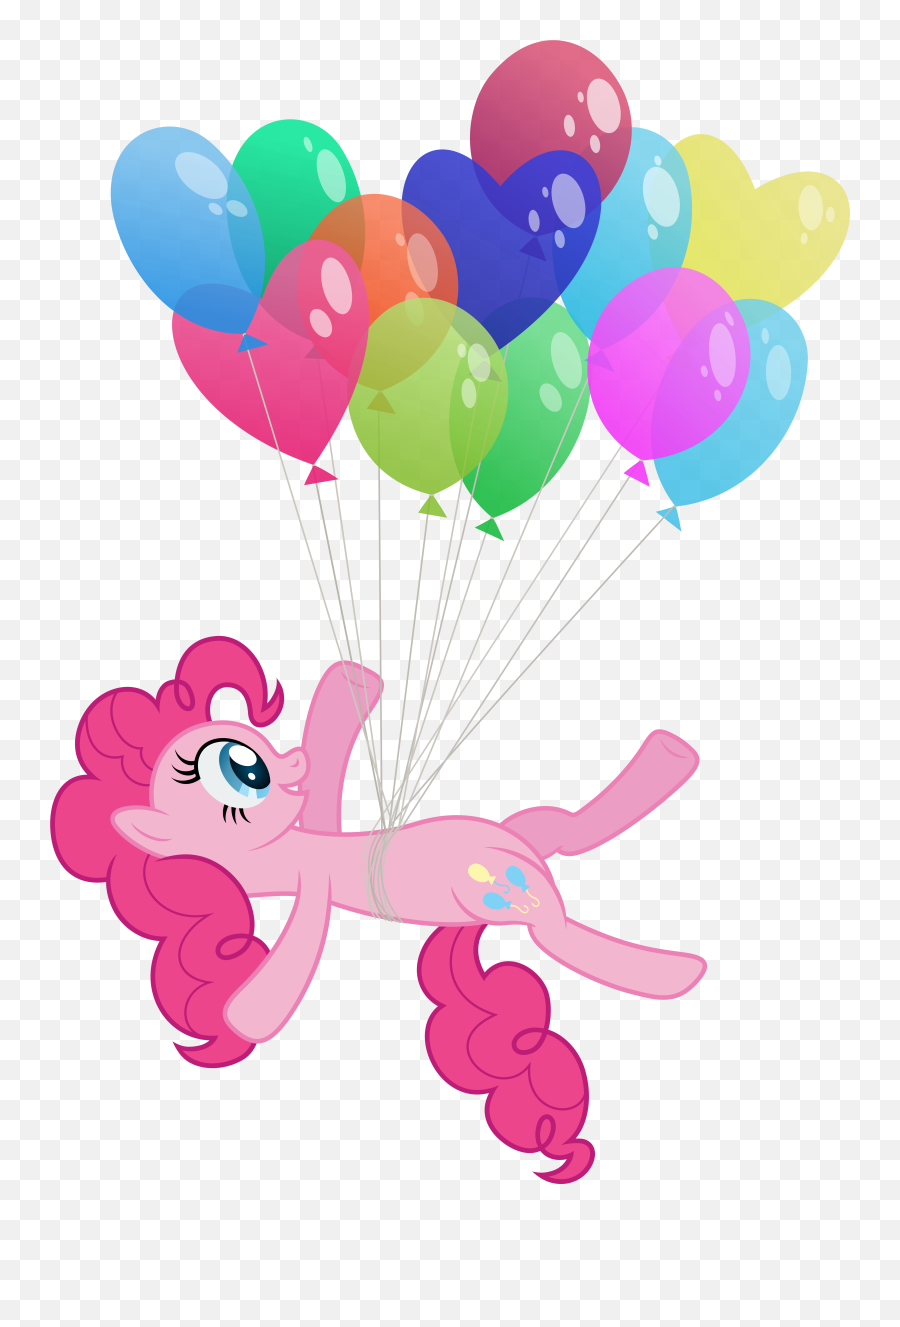 Download Hd Pinkie Pie Rarity Twilight Sparkle Rainbow Dash - Little Pony With Balloons Png,Little Pony Png